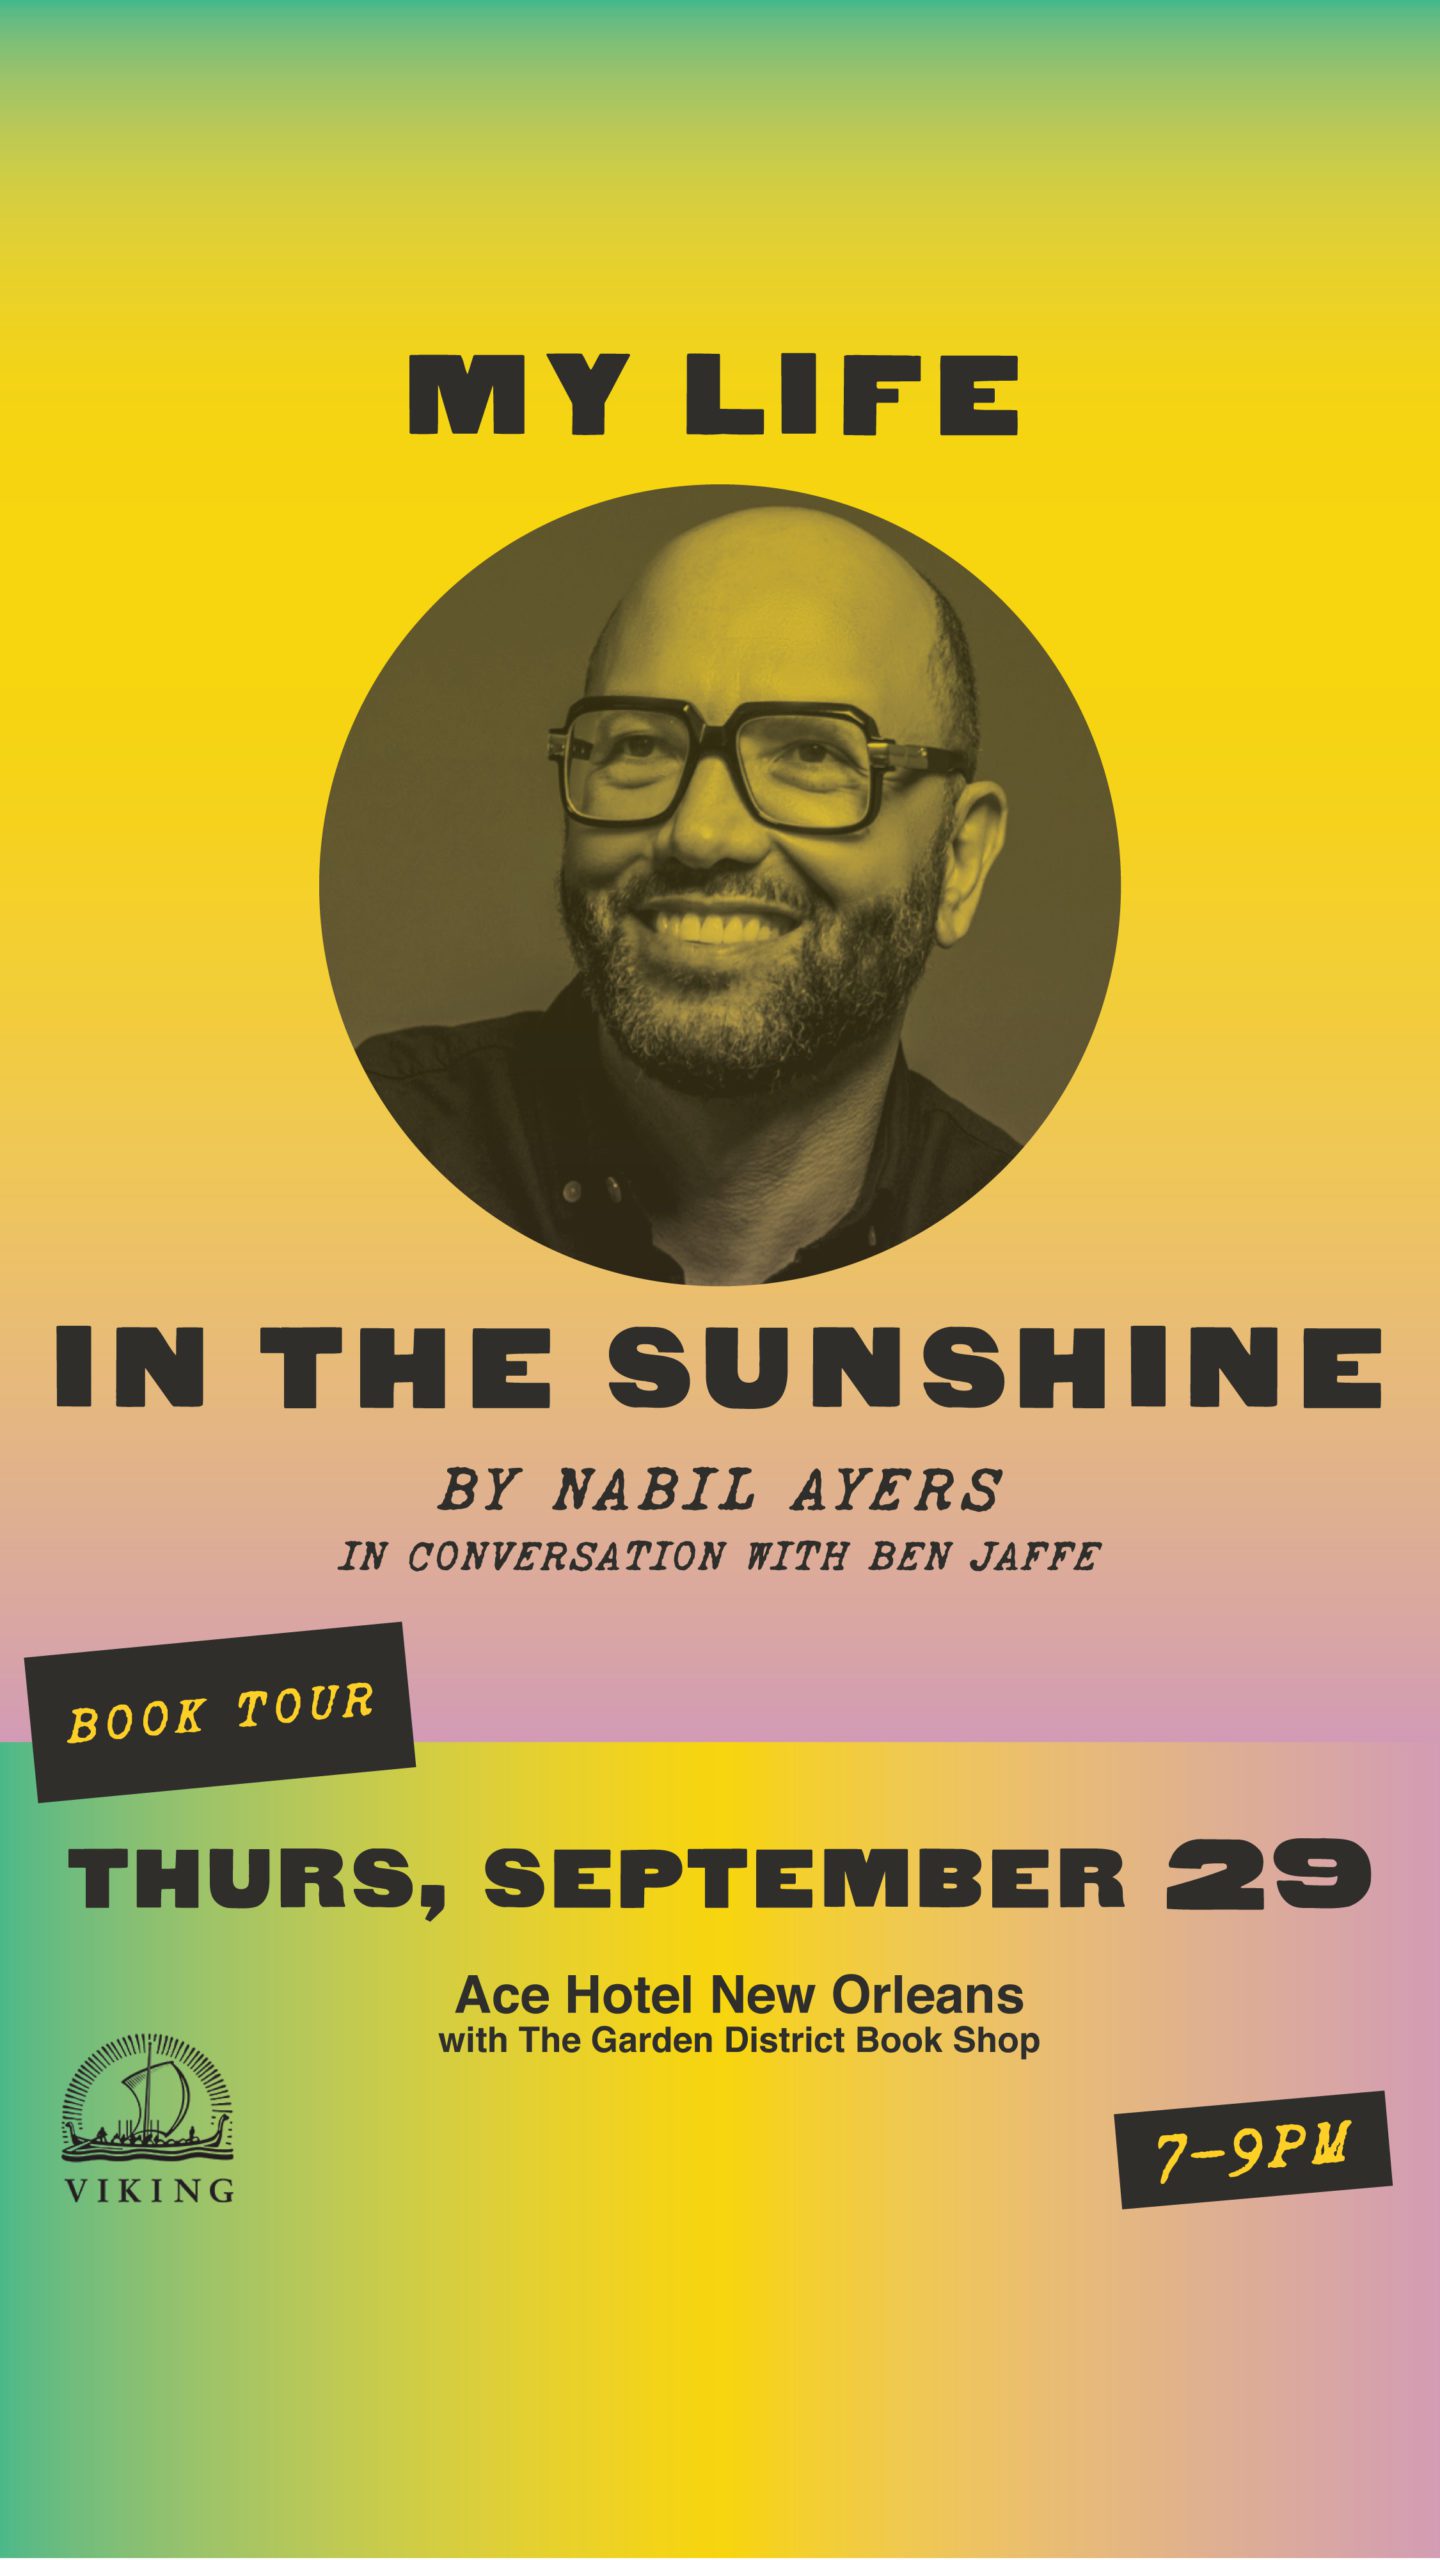 NOLA x NOLA and Three Keys Presents: My Life in the Sunshine Book Tour with Nabil Ayers promo